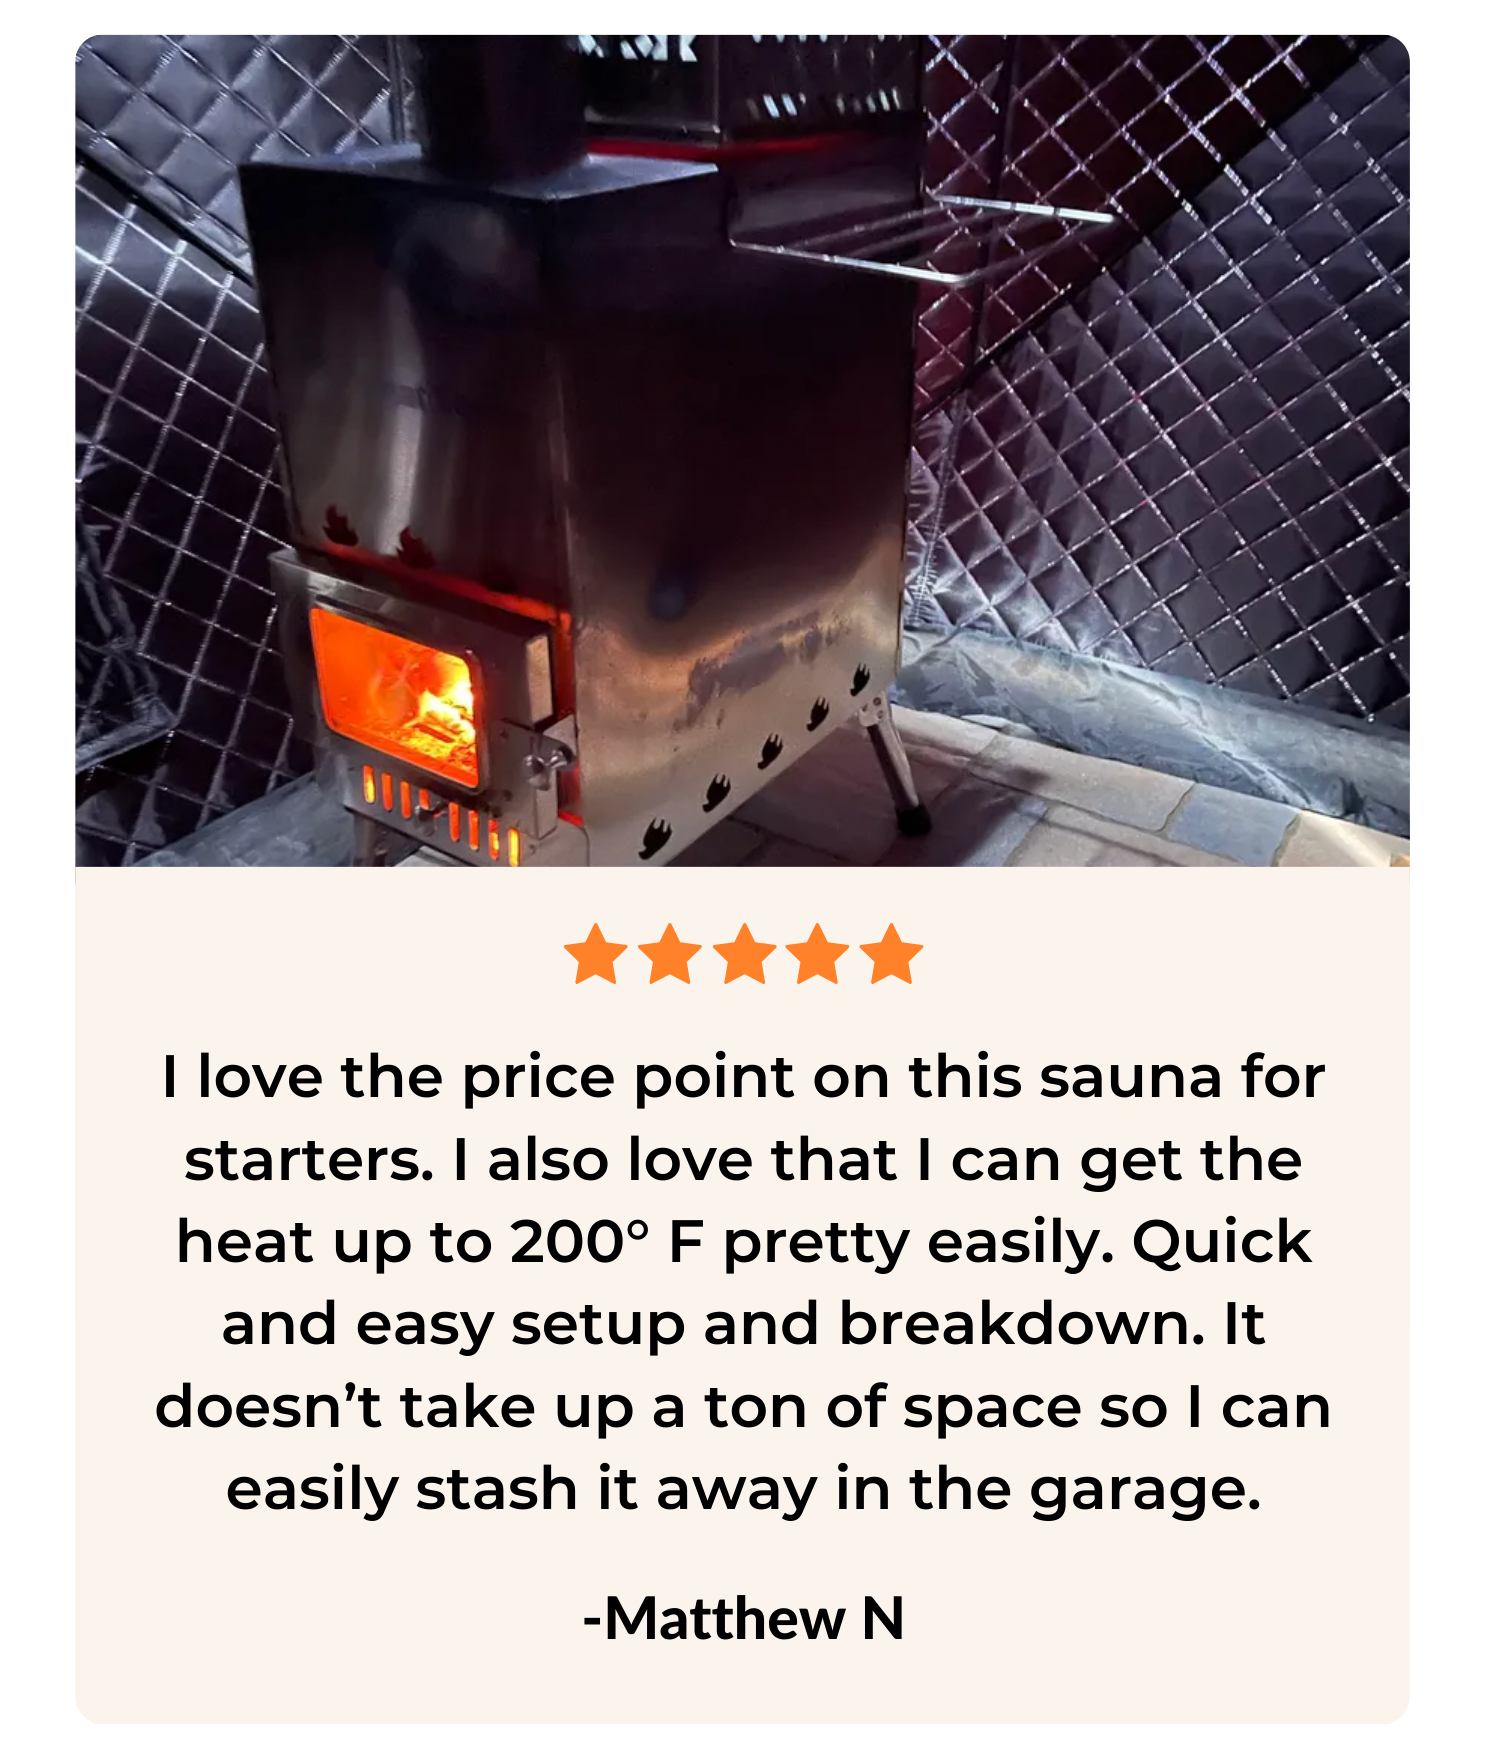 Sweat Tent Review " I love the price point on this sauna, I also love how quickly it heats up." 